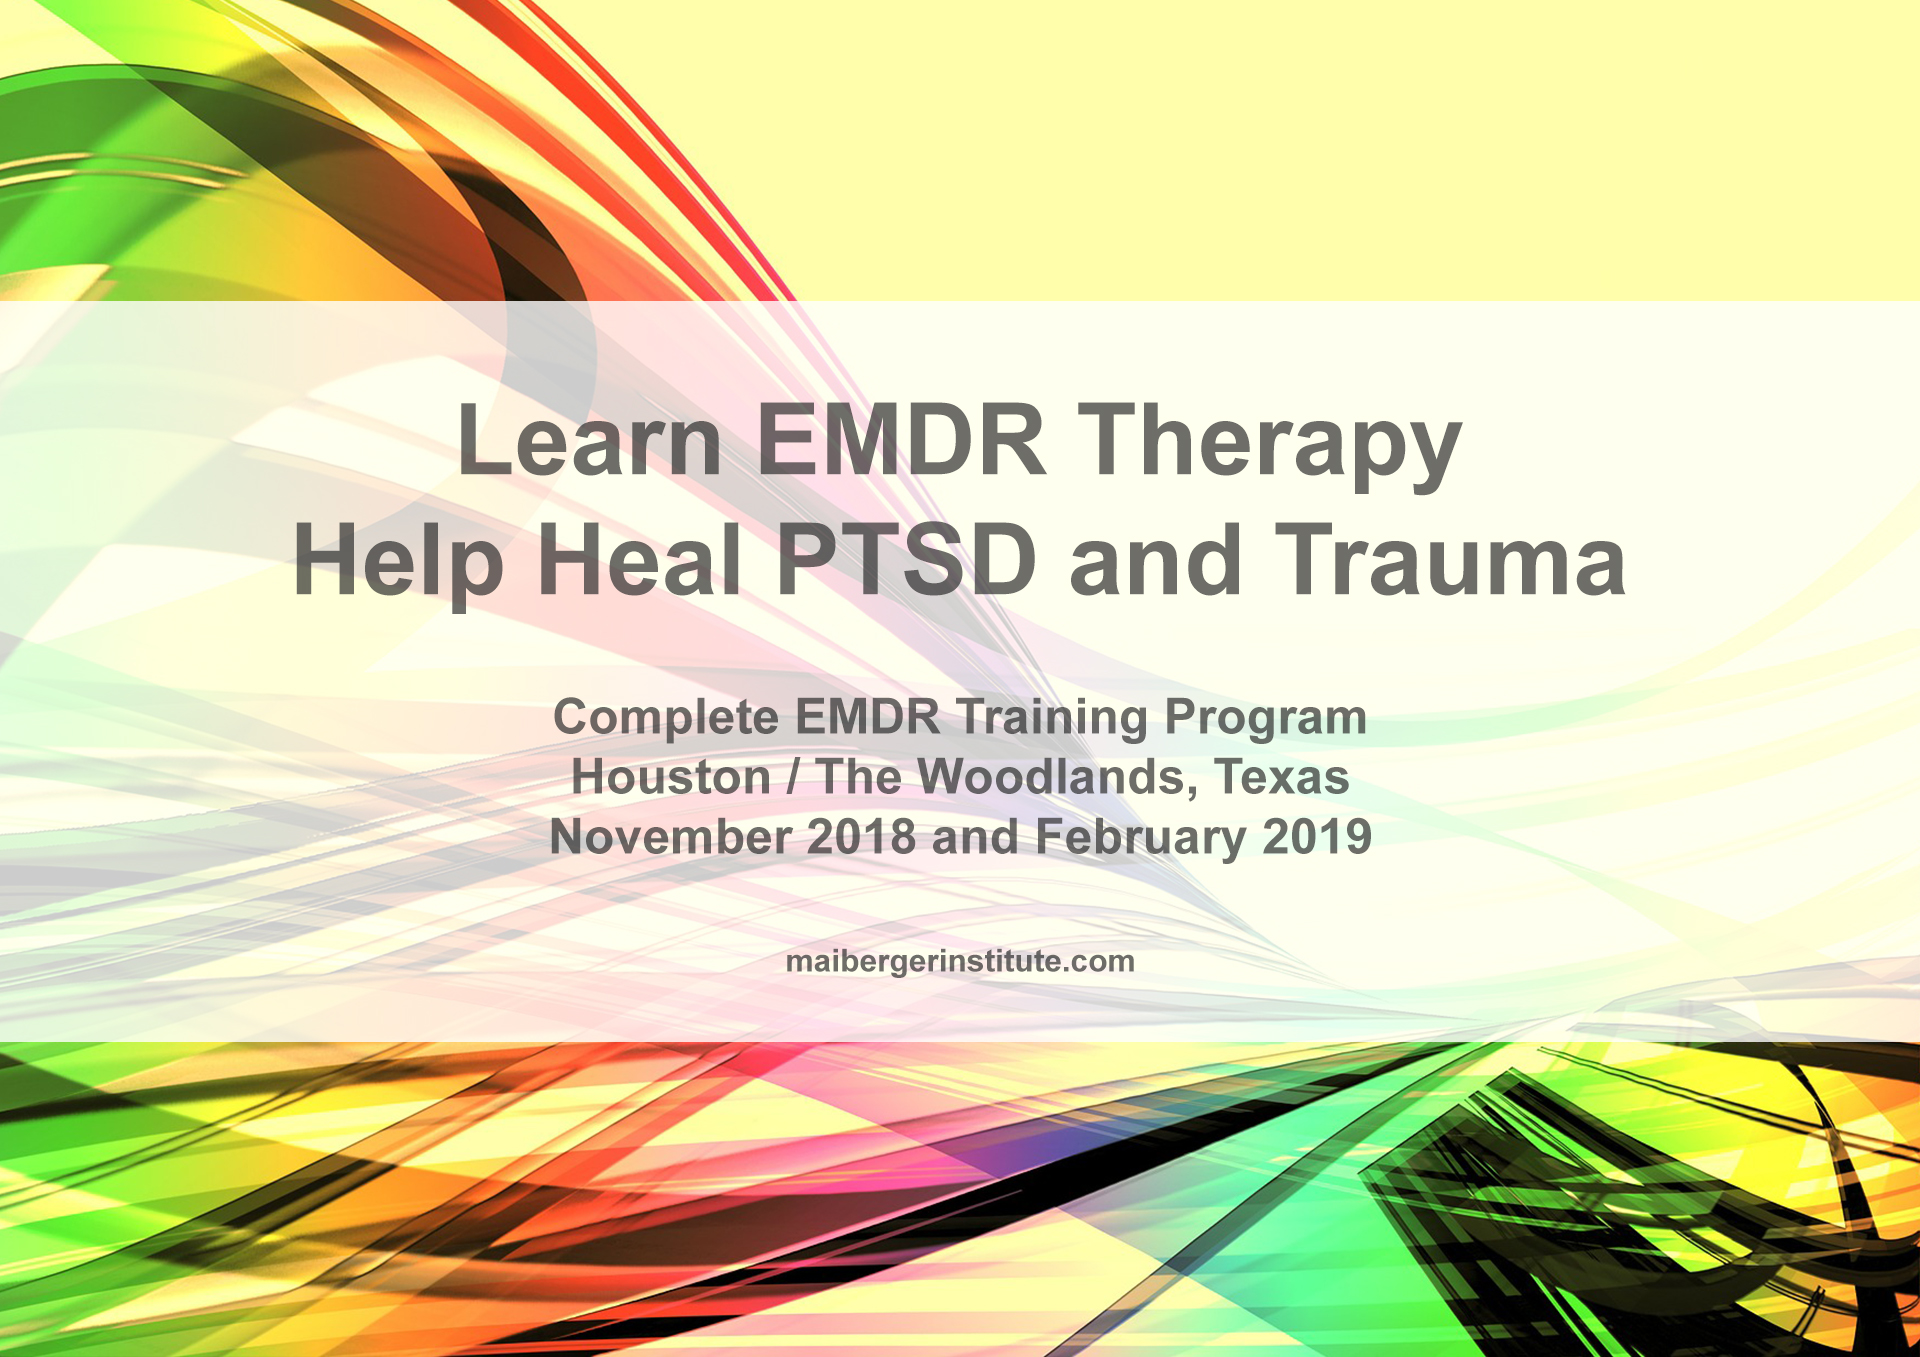 EMDR Training in Houston - The Woodlands, Texas - November 2018 and February 2019 - Learn EMDR Therapy to Help Heal PTSD and Trauma